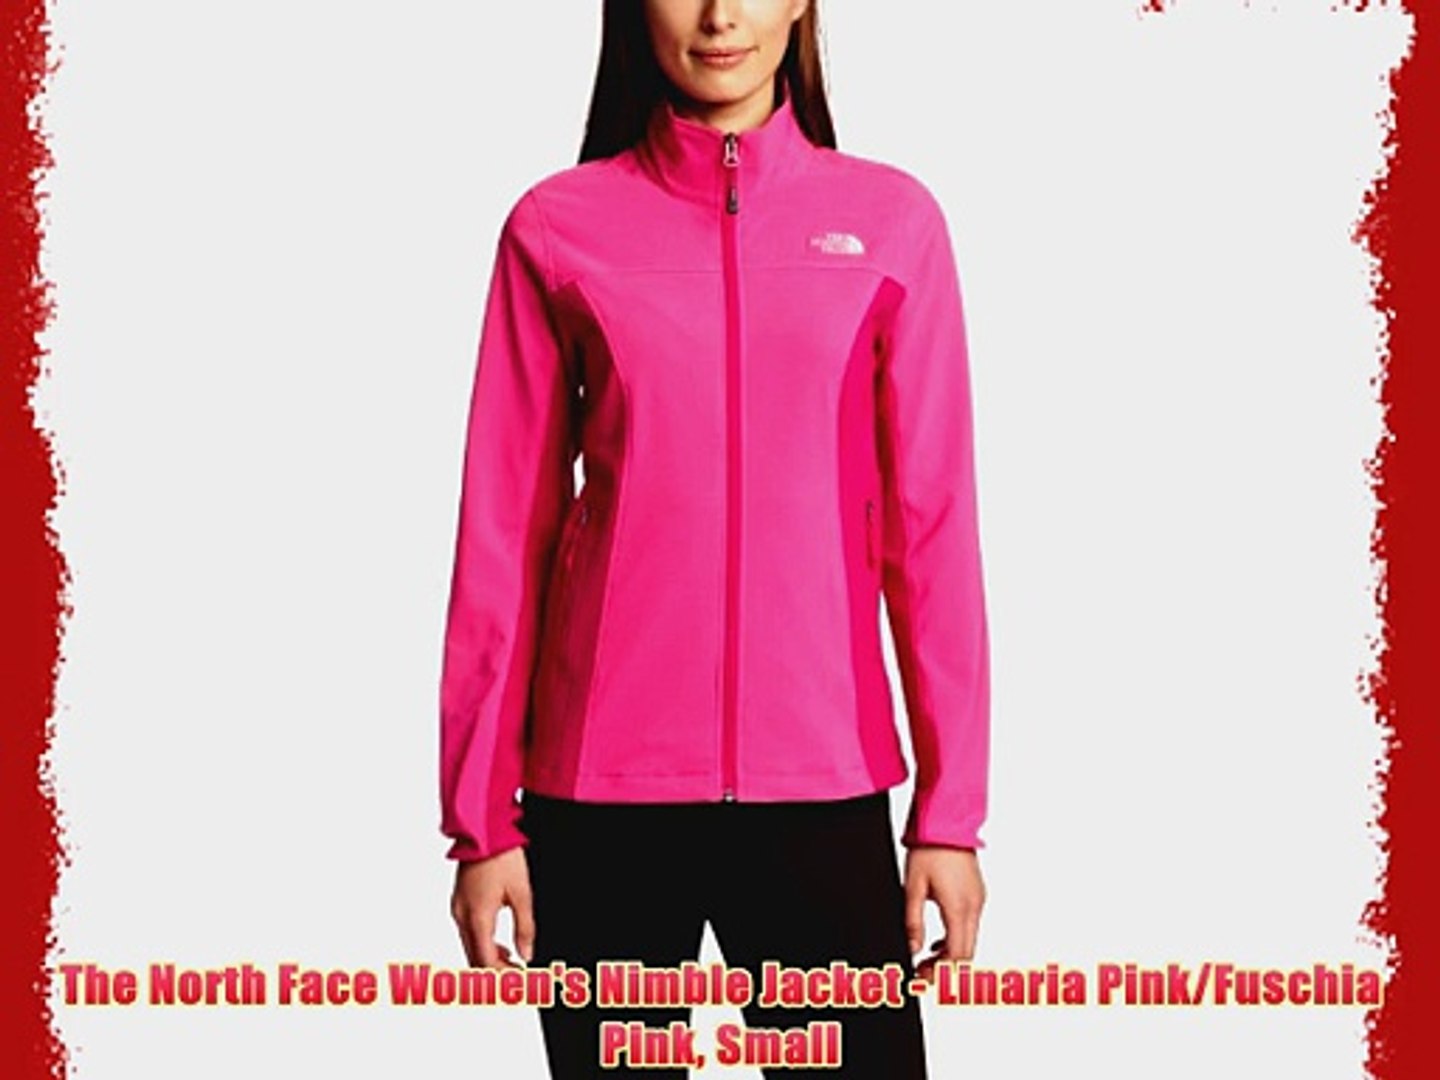 The North Face Women's Nimble Jacket - Linaria Pink/Fuschia Pink Small -  video Dailymotion